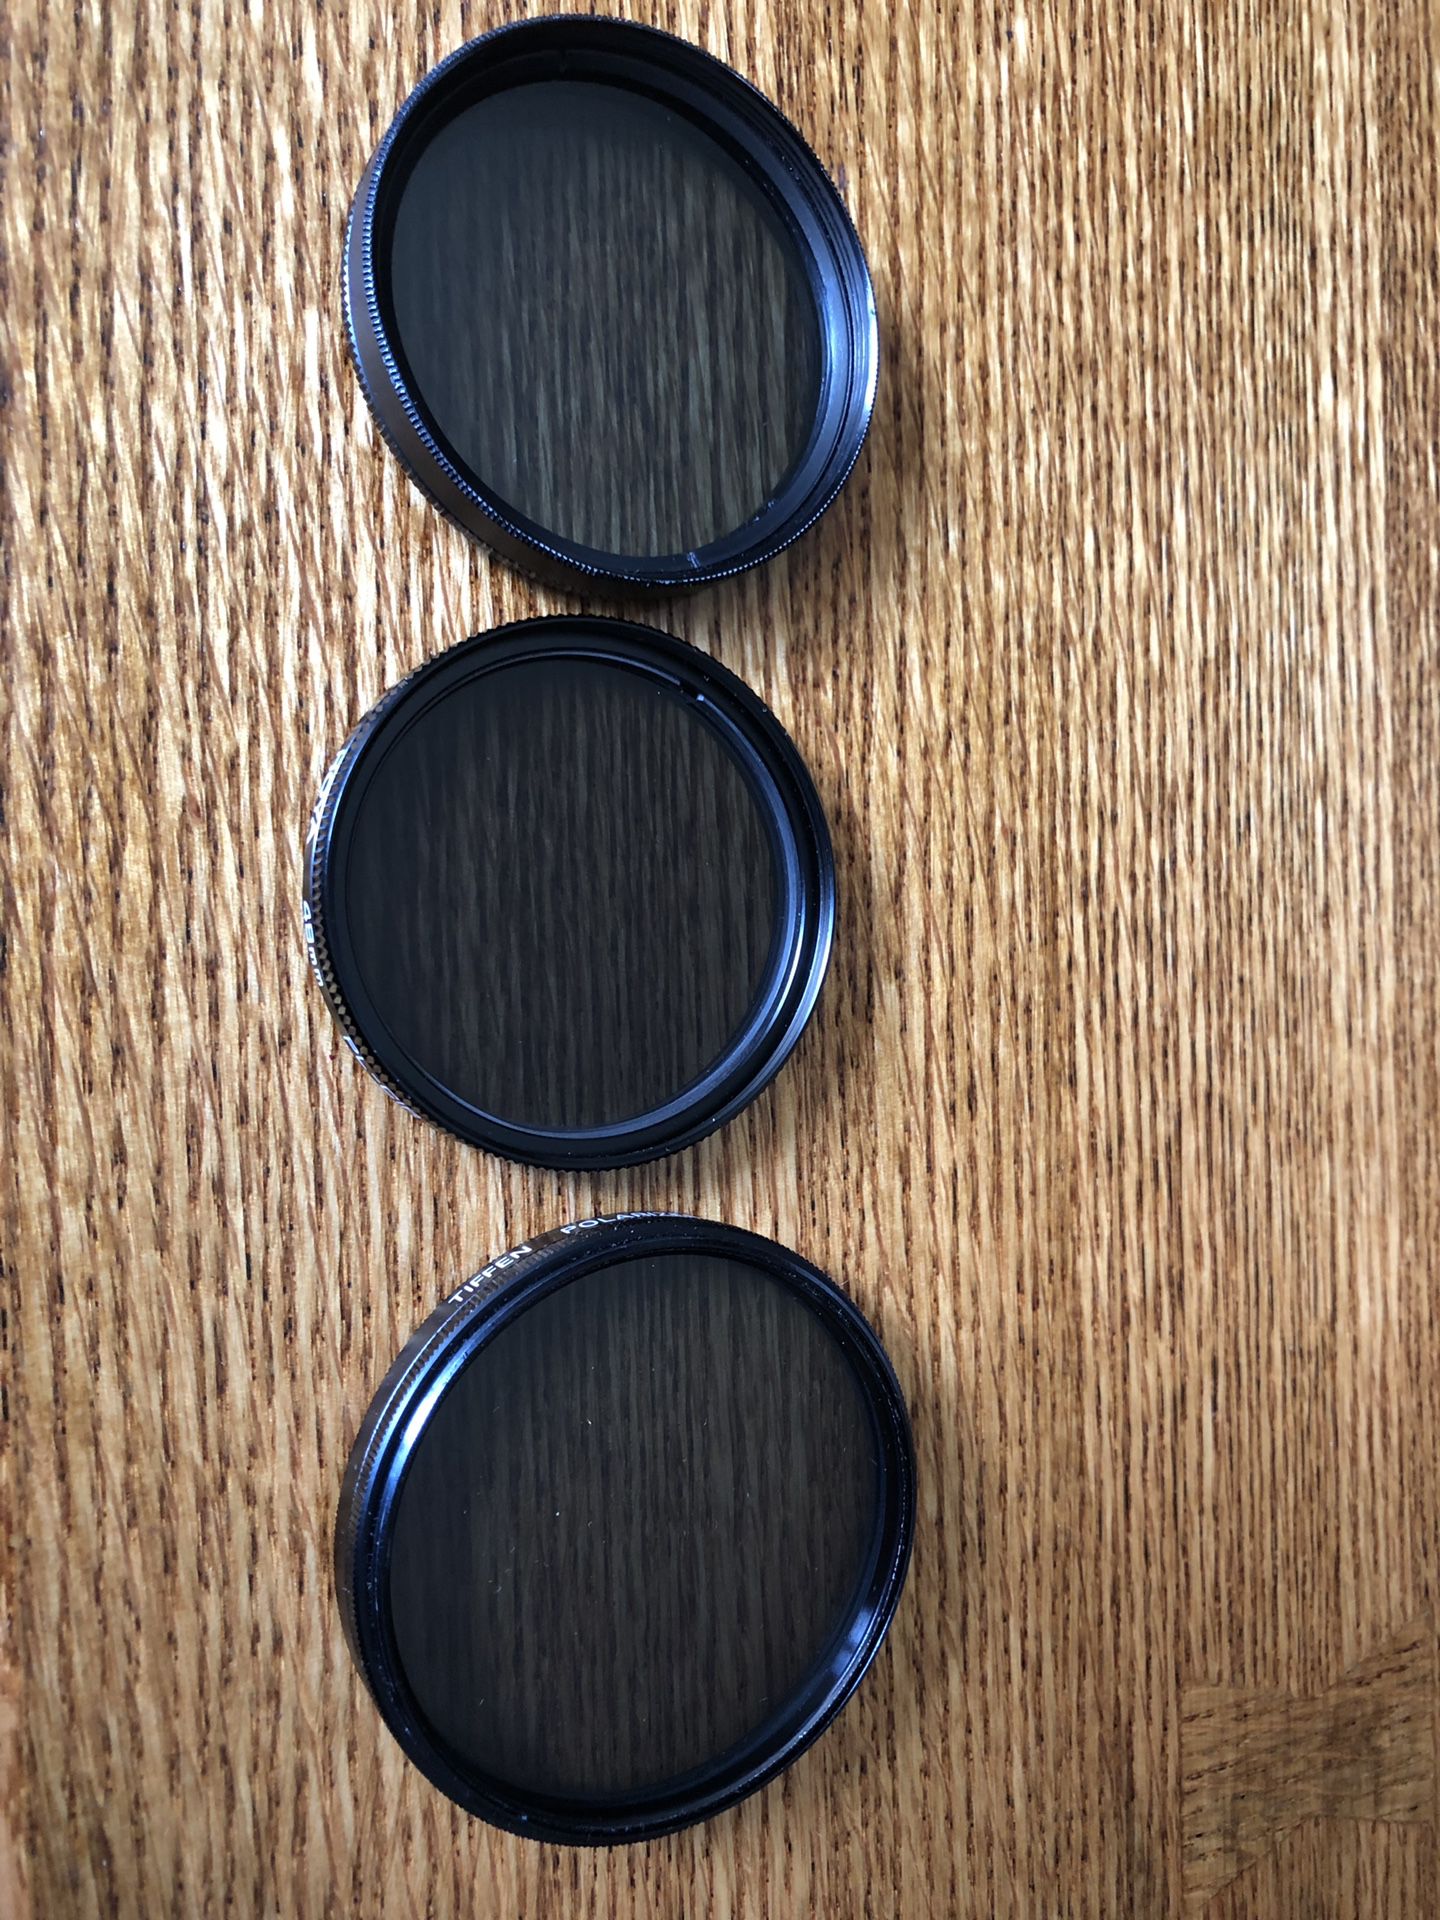 Polarizing filter’s. 49 mm and 55 mm. $10 each